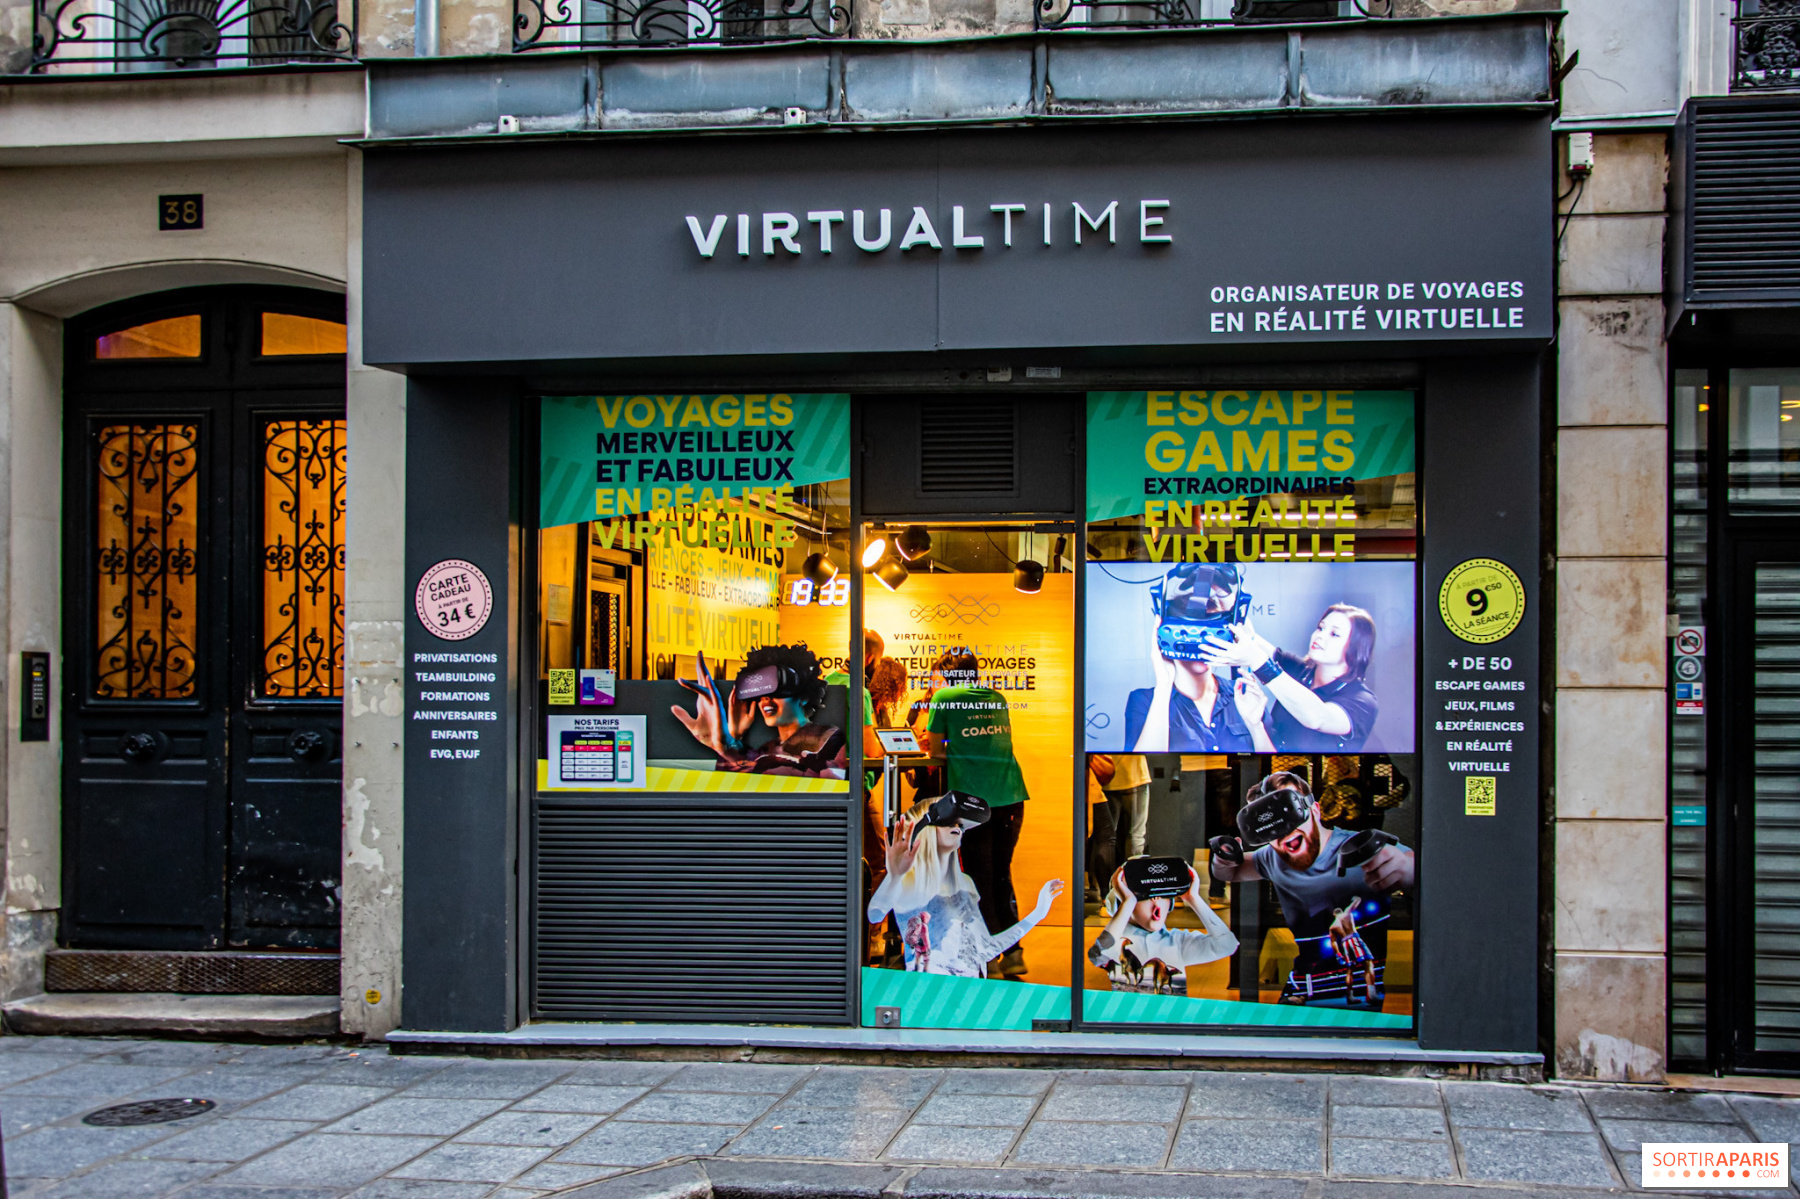 Paris 2024: Virtual Reality Animation of the Olympic Games in VirtualTime